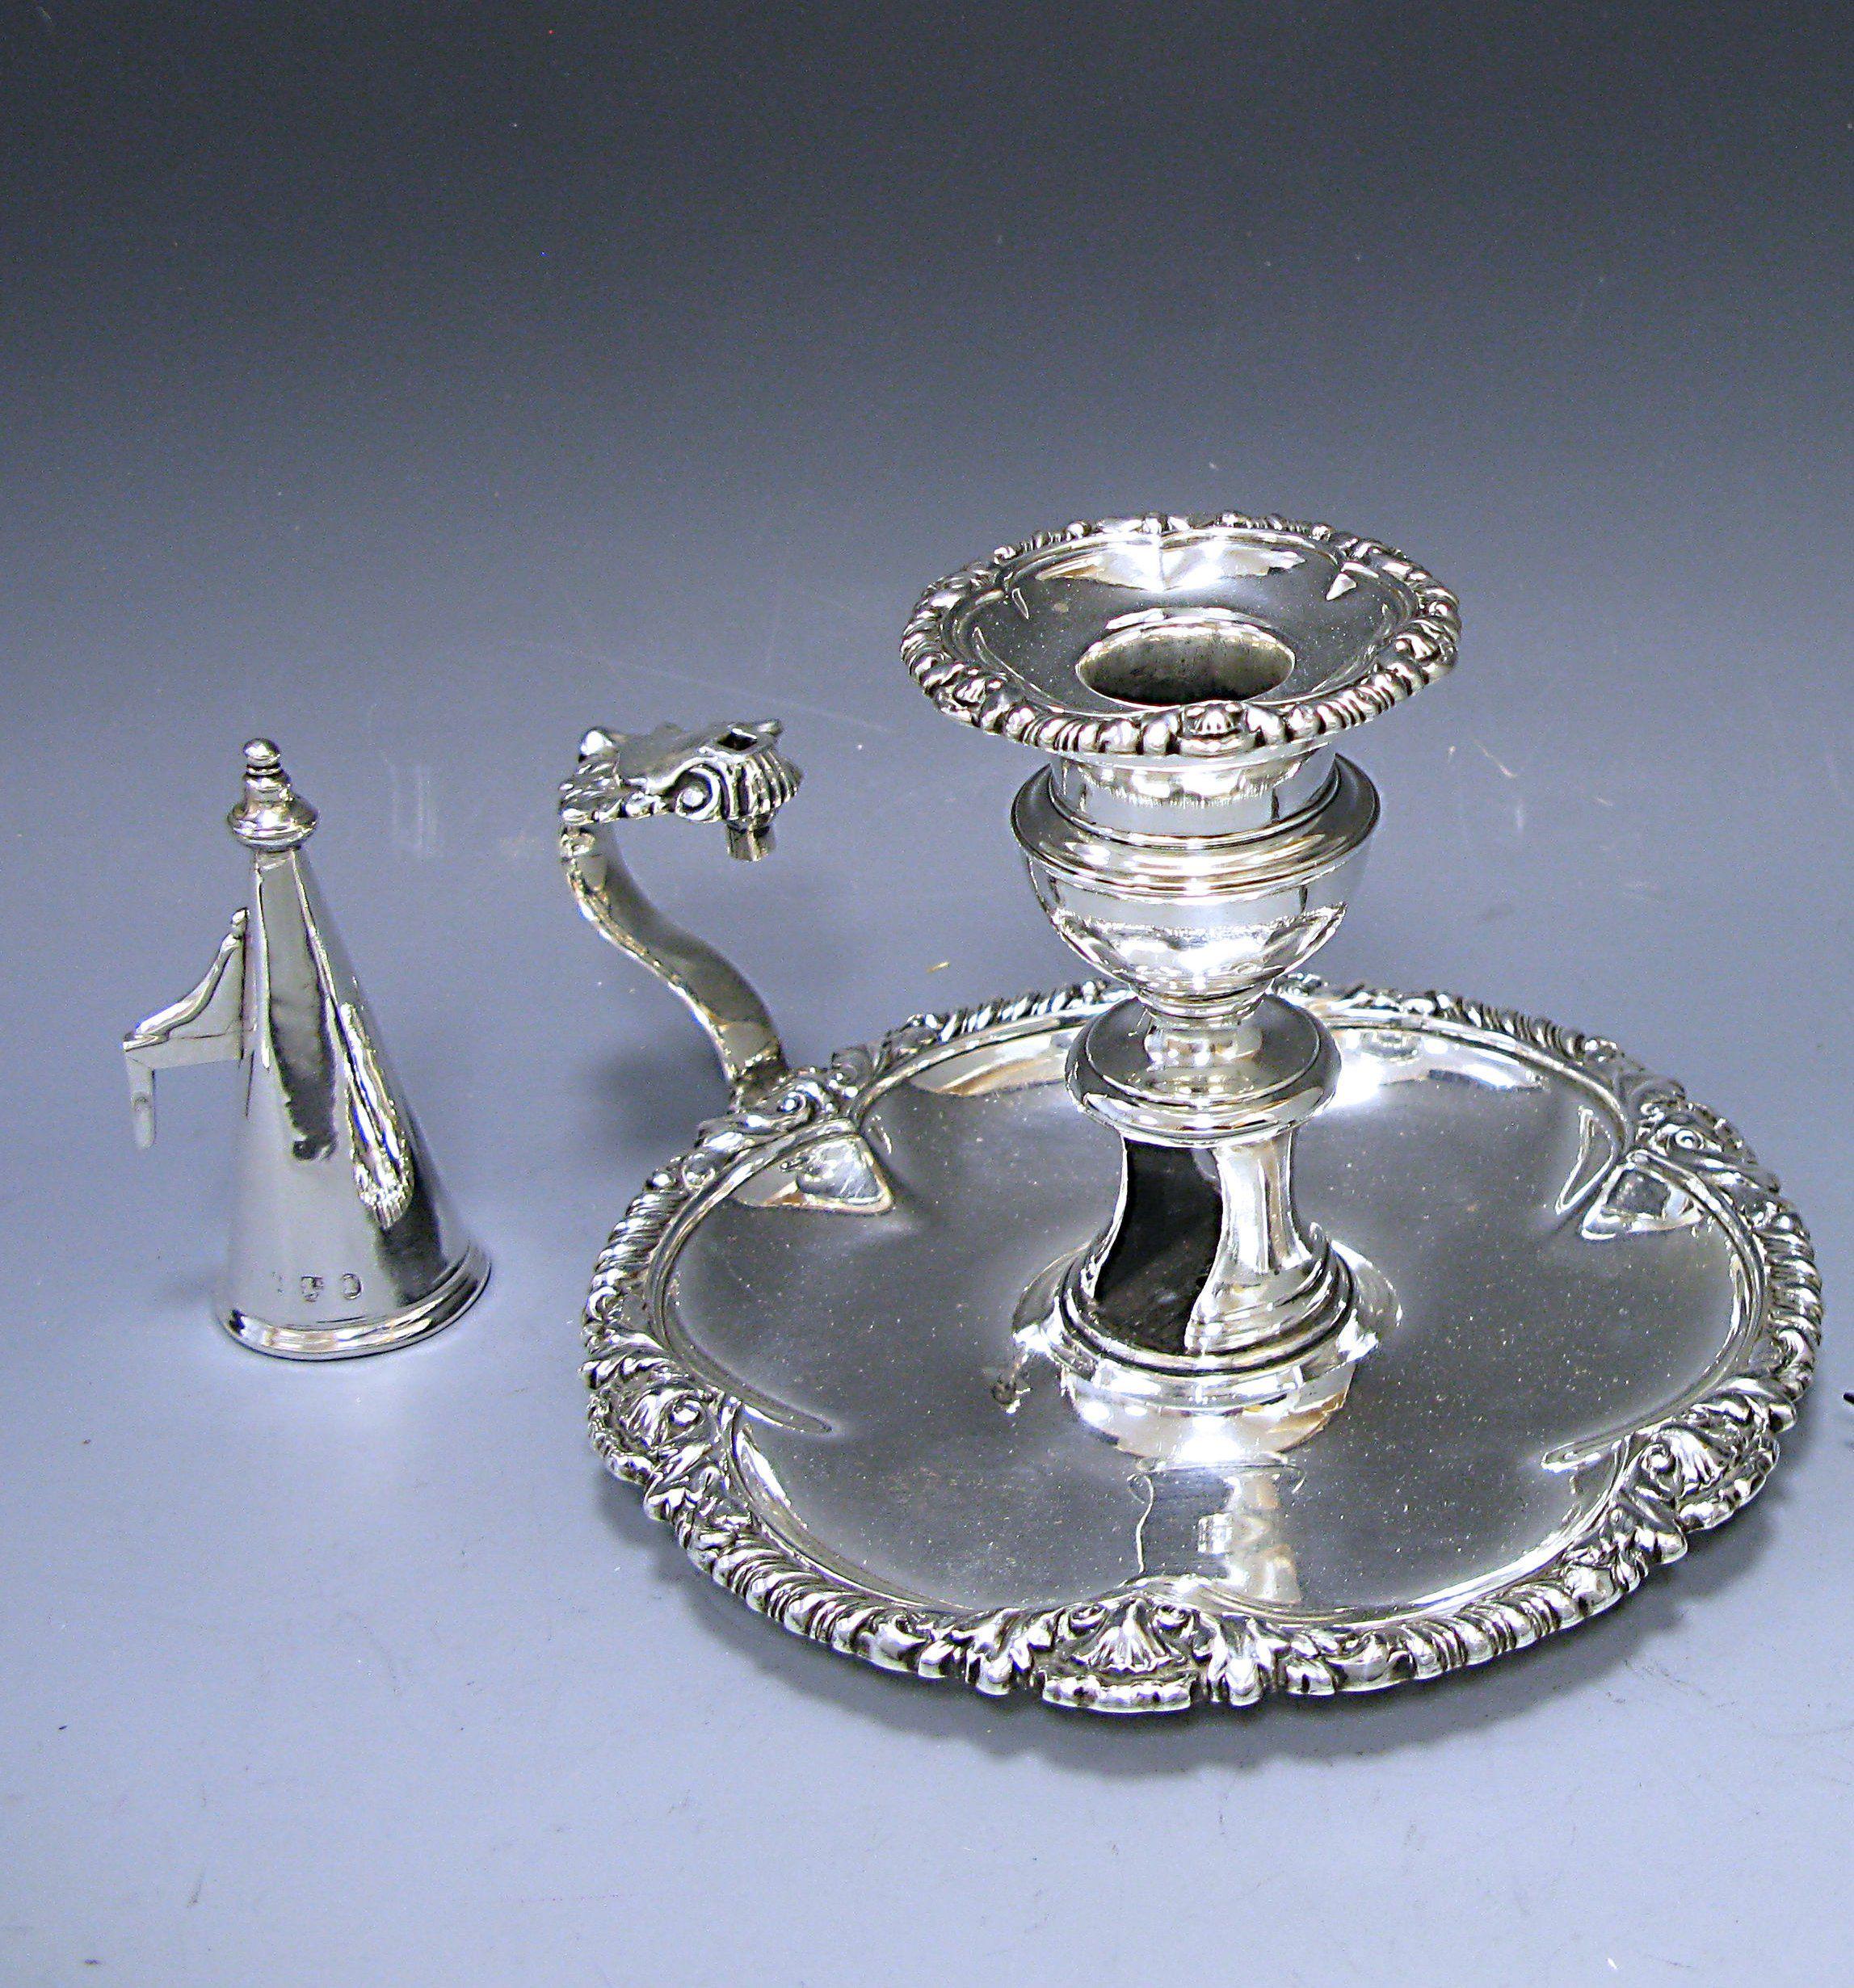 A fine antique George IV sterling silver Chamberstick. The circular base has a gadroon and shell border and the Chambestick retains the plain silver conical stopper.